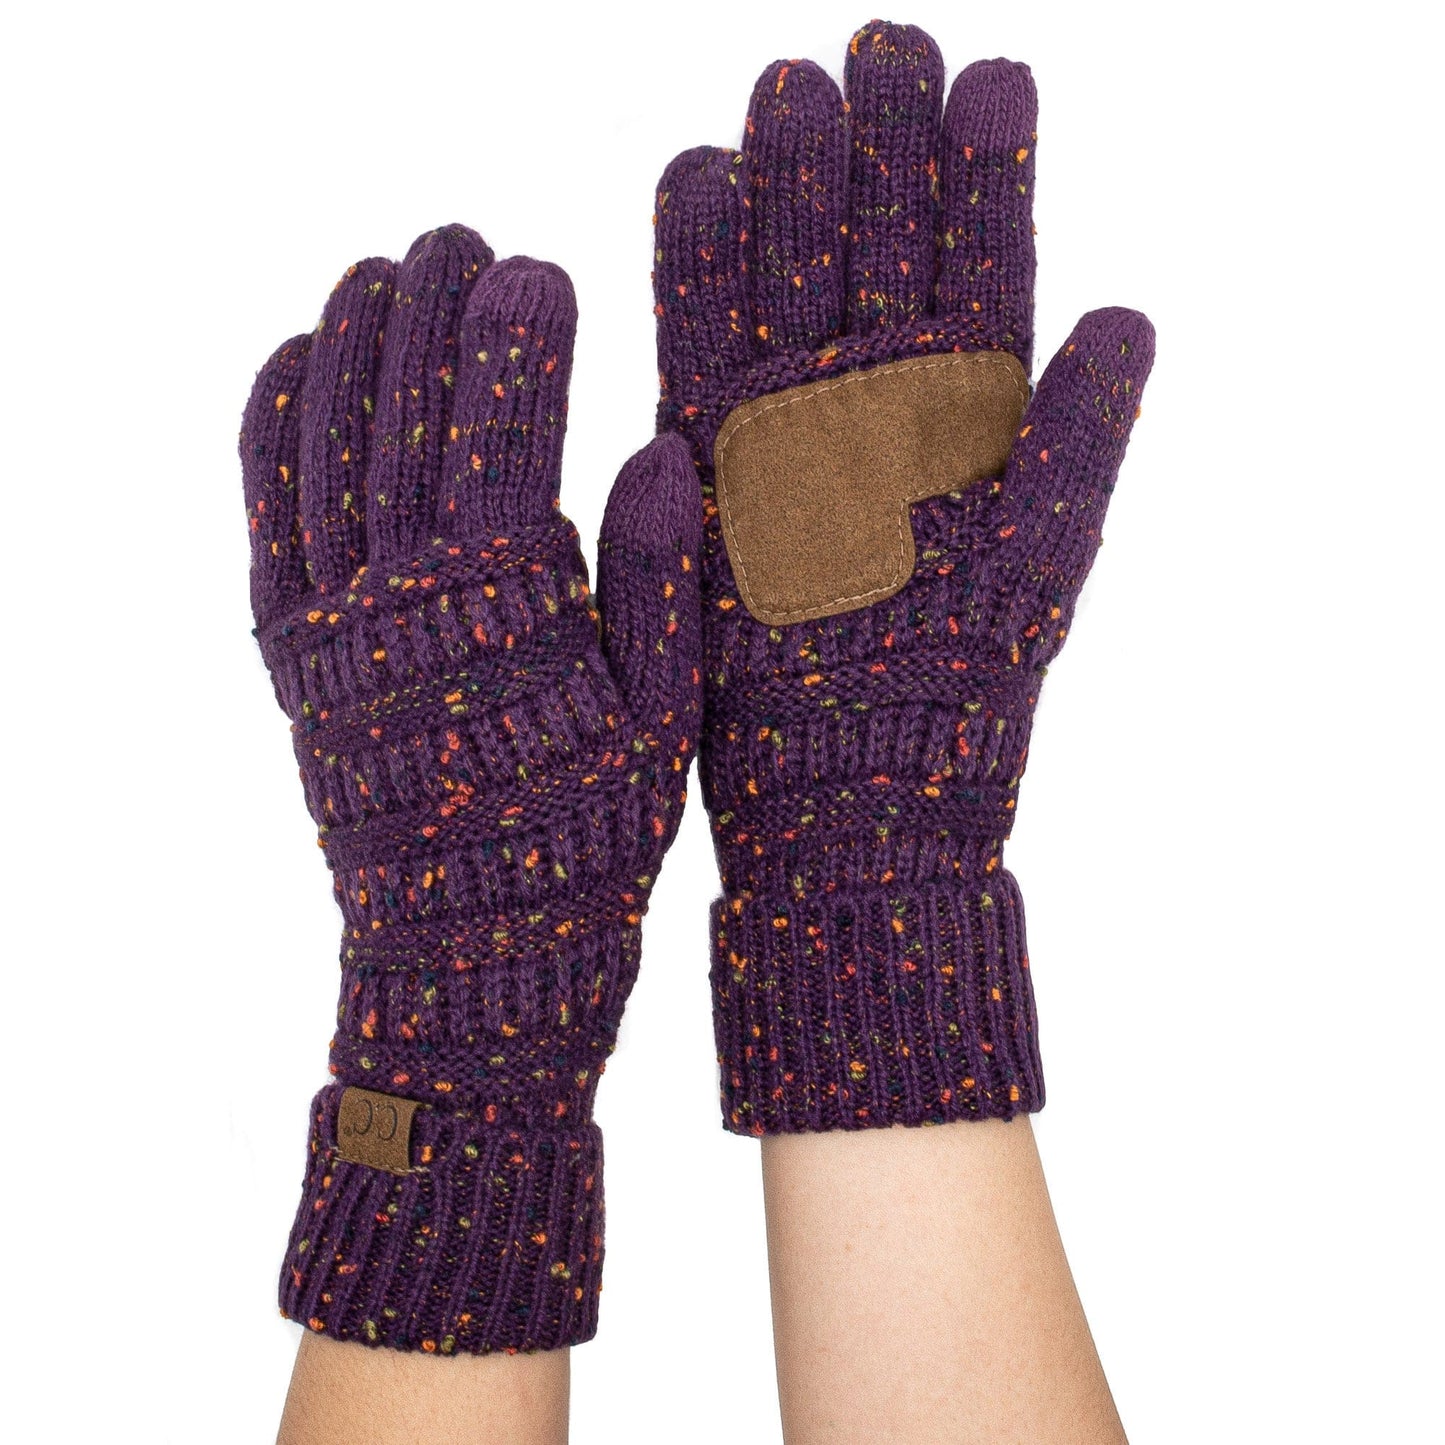 C.C Apparel Copy of C.C G20 - Unisex Cable Knit Winter Warm Anti-Slip Touchscreen Texting Gloves